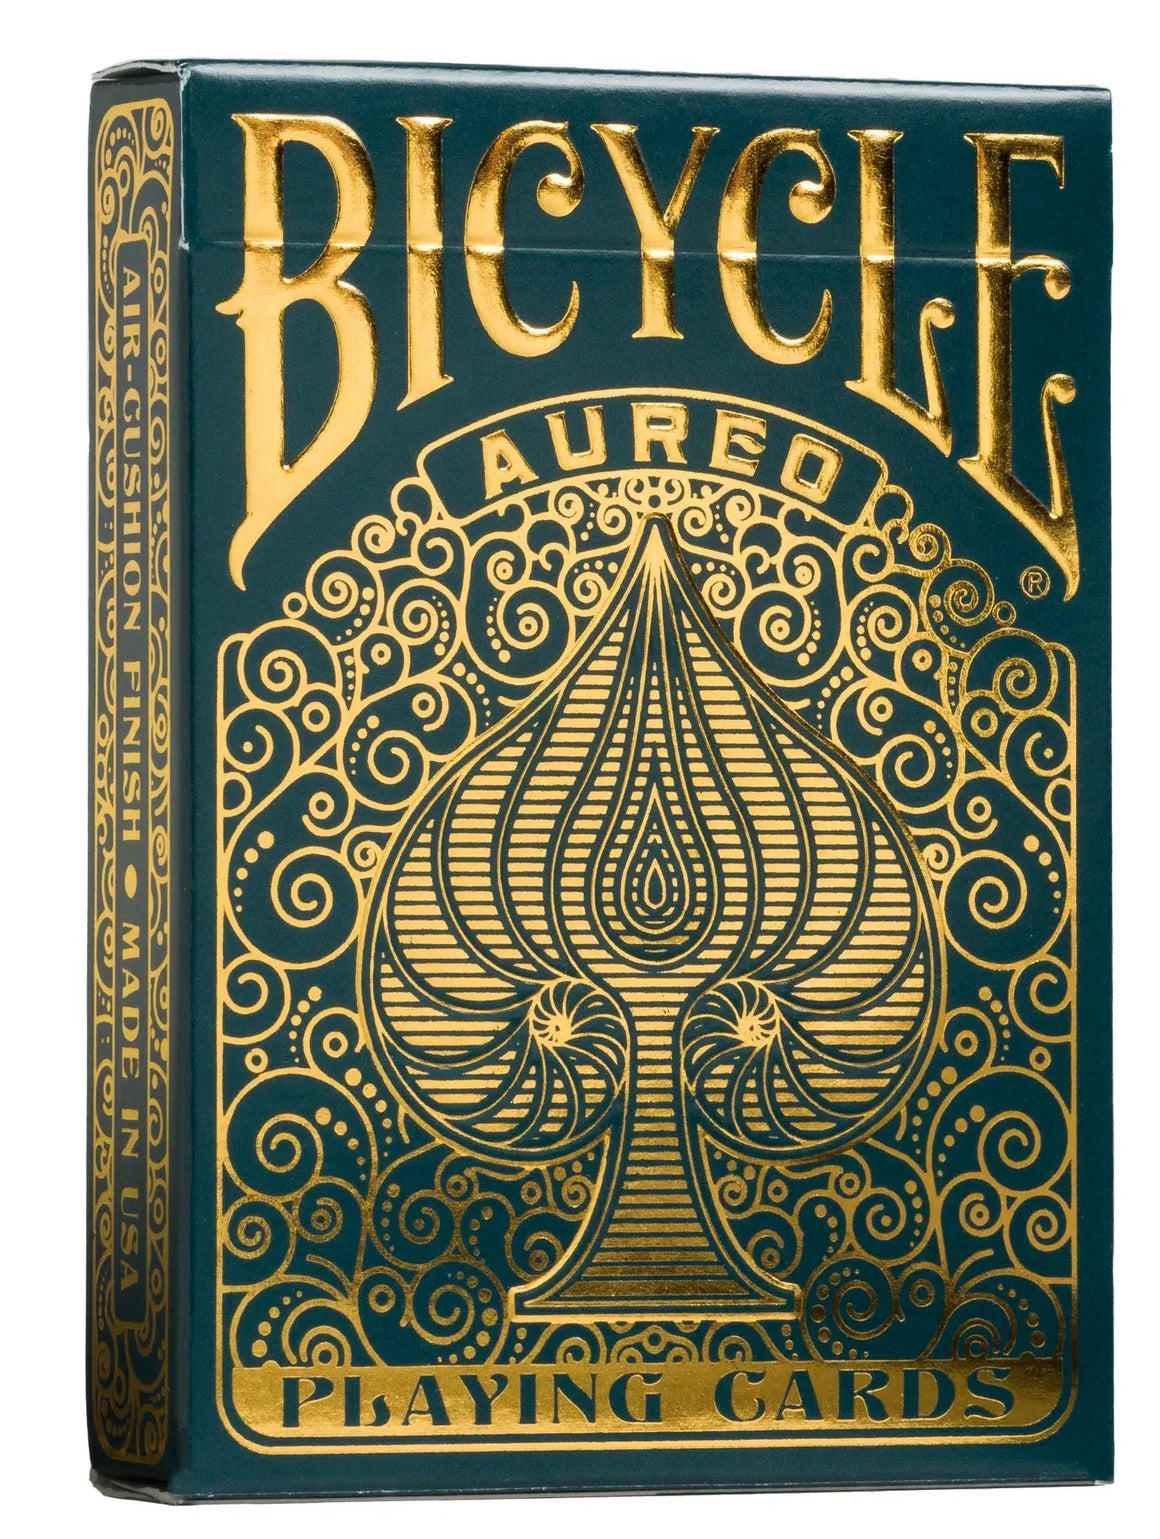 BICYCLE AUREO FOIL PLAYING CARDS